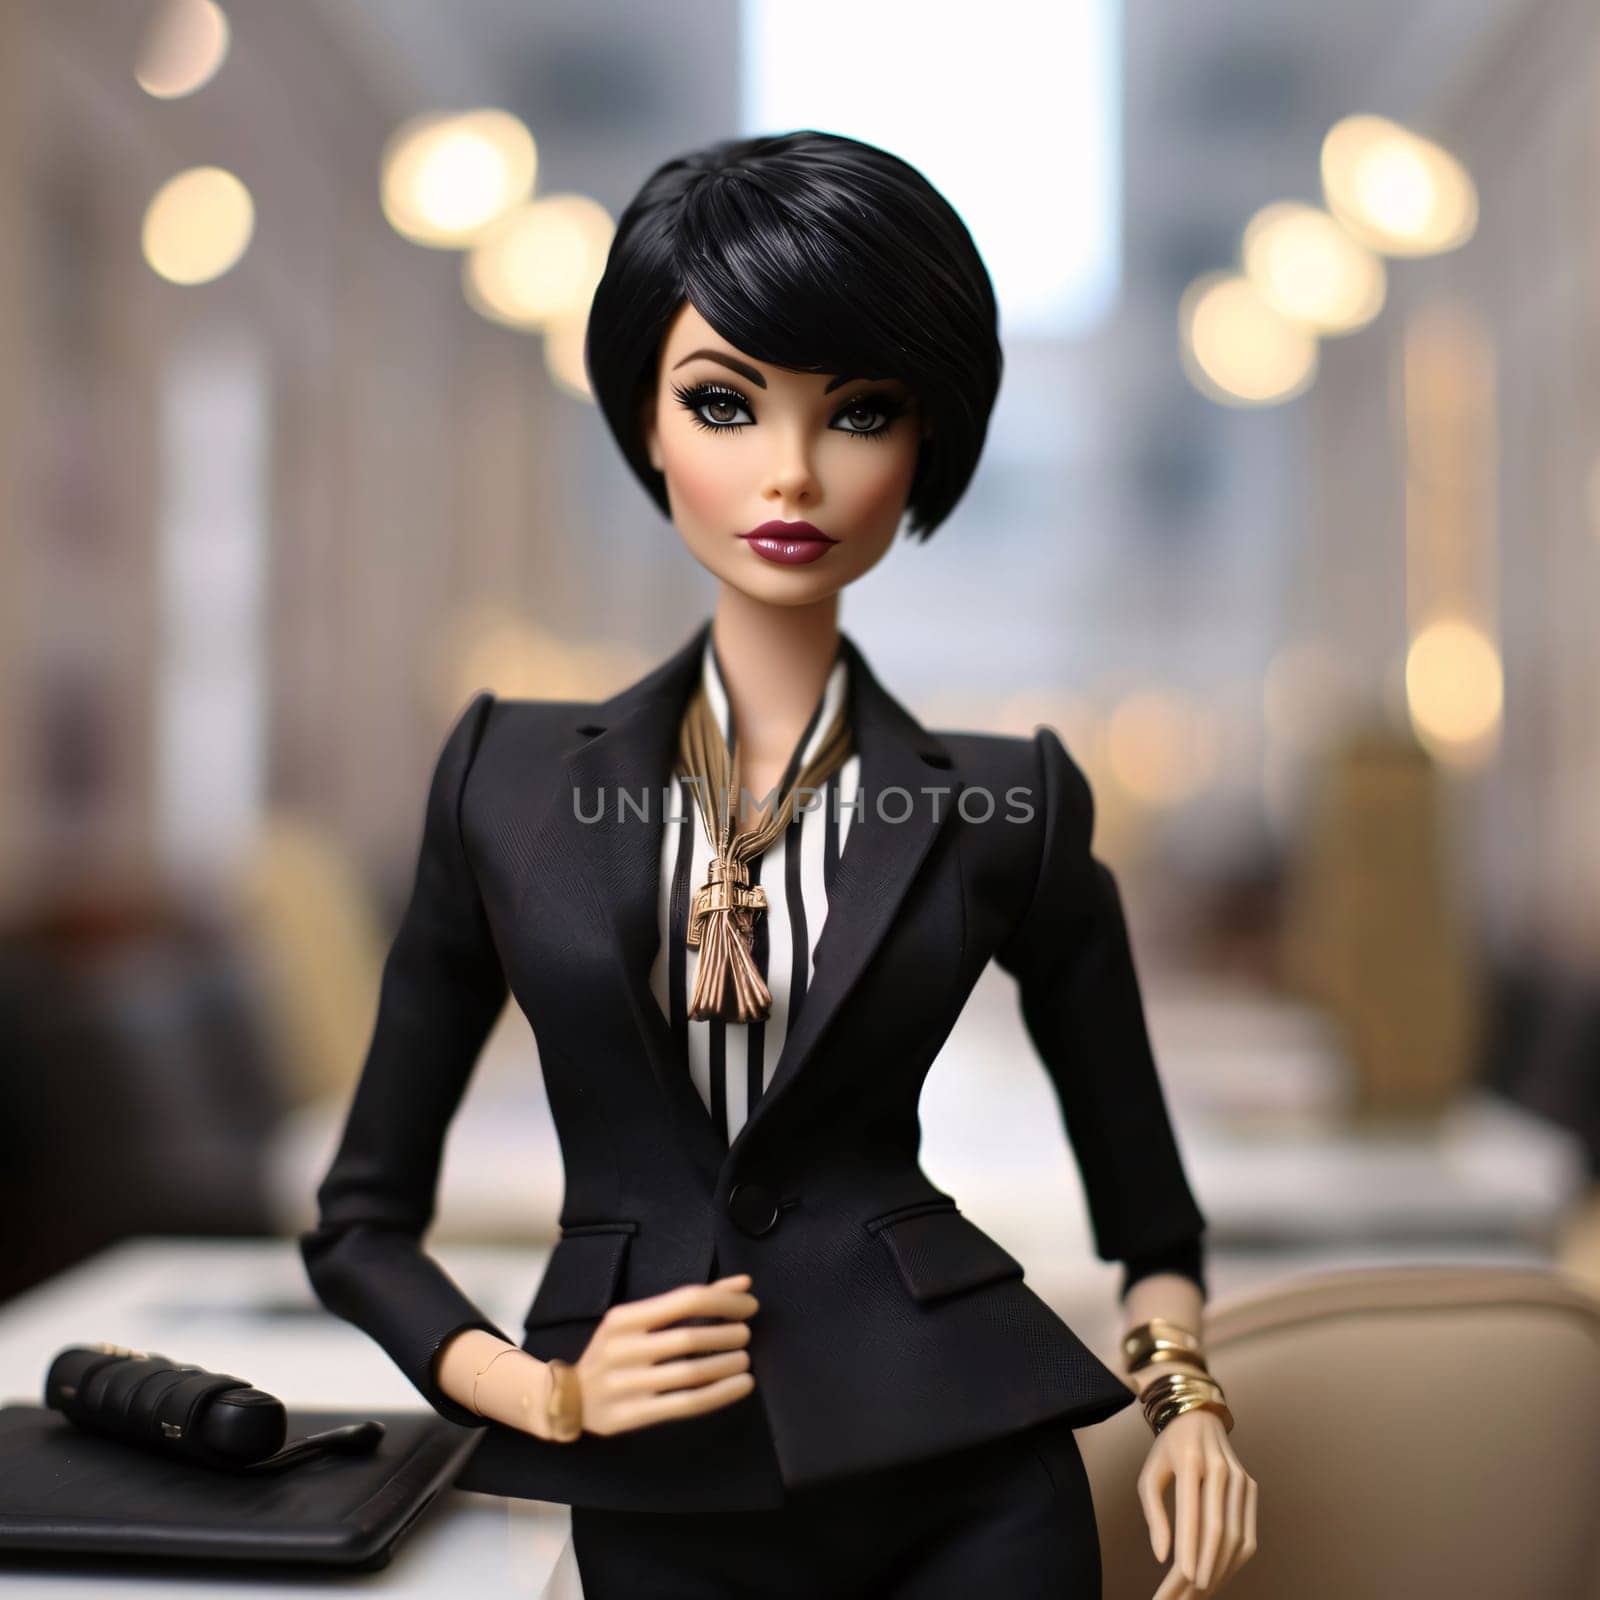 Stock Market: Close-up of a female doll in a business suit in a cafe